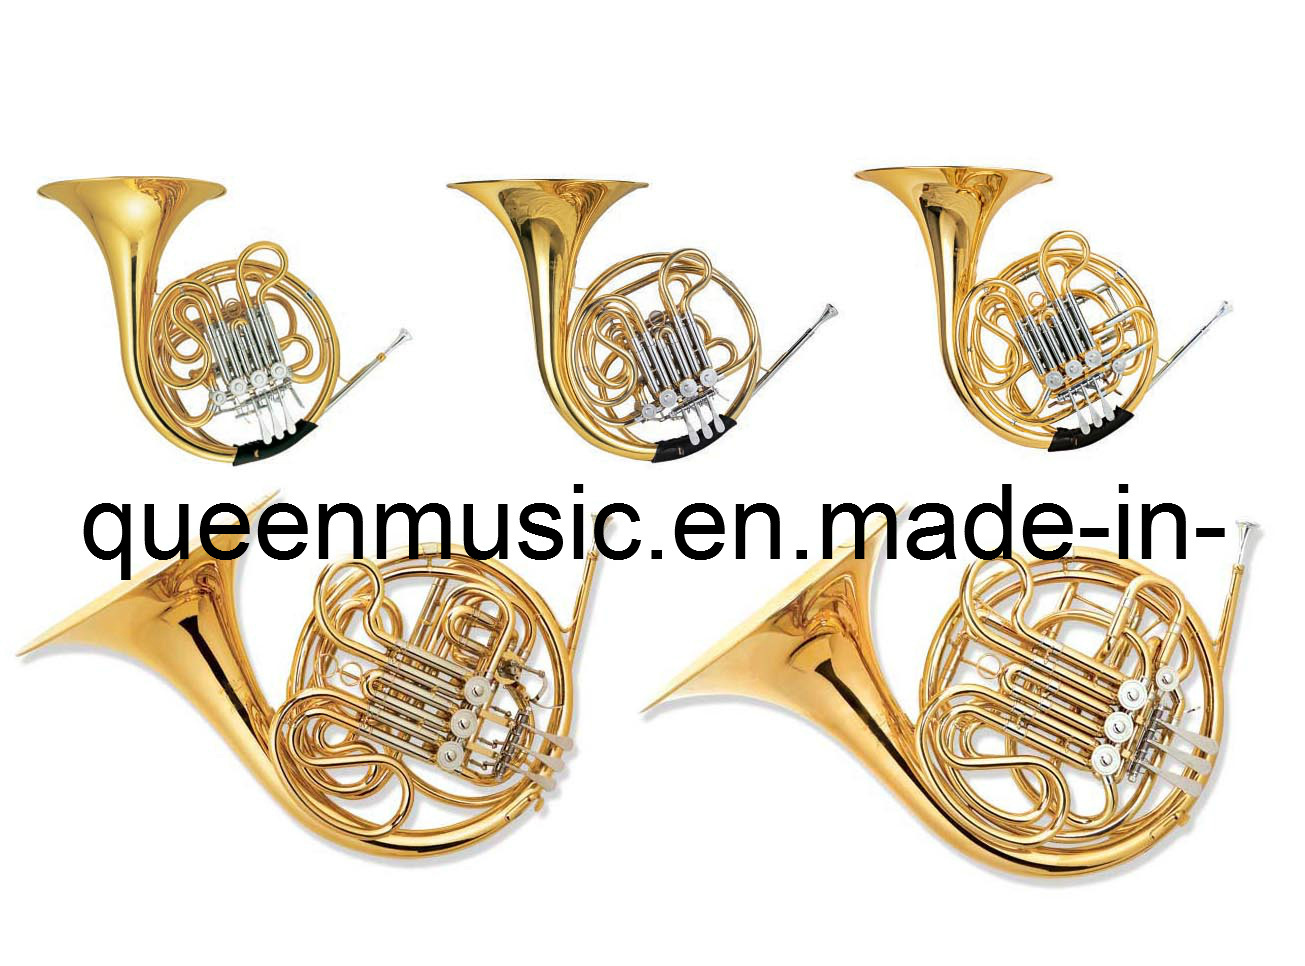 4-Key Double French Horn (QFH102-109)